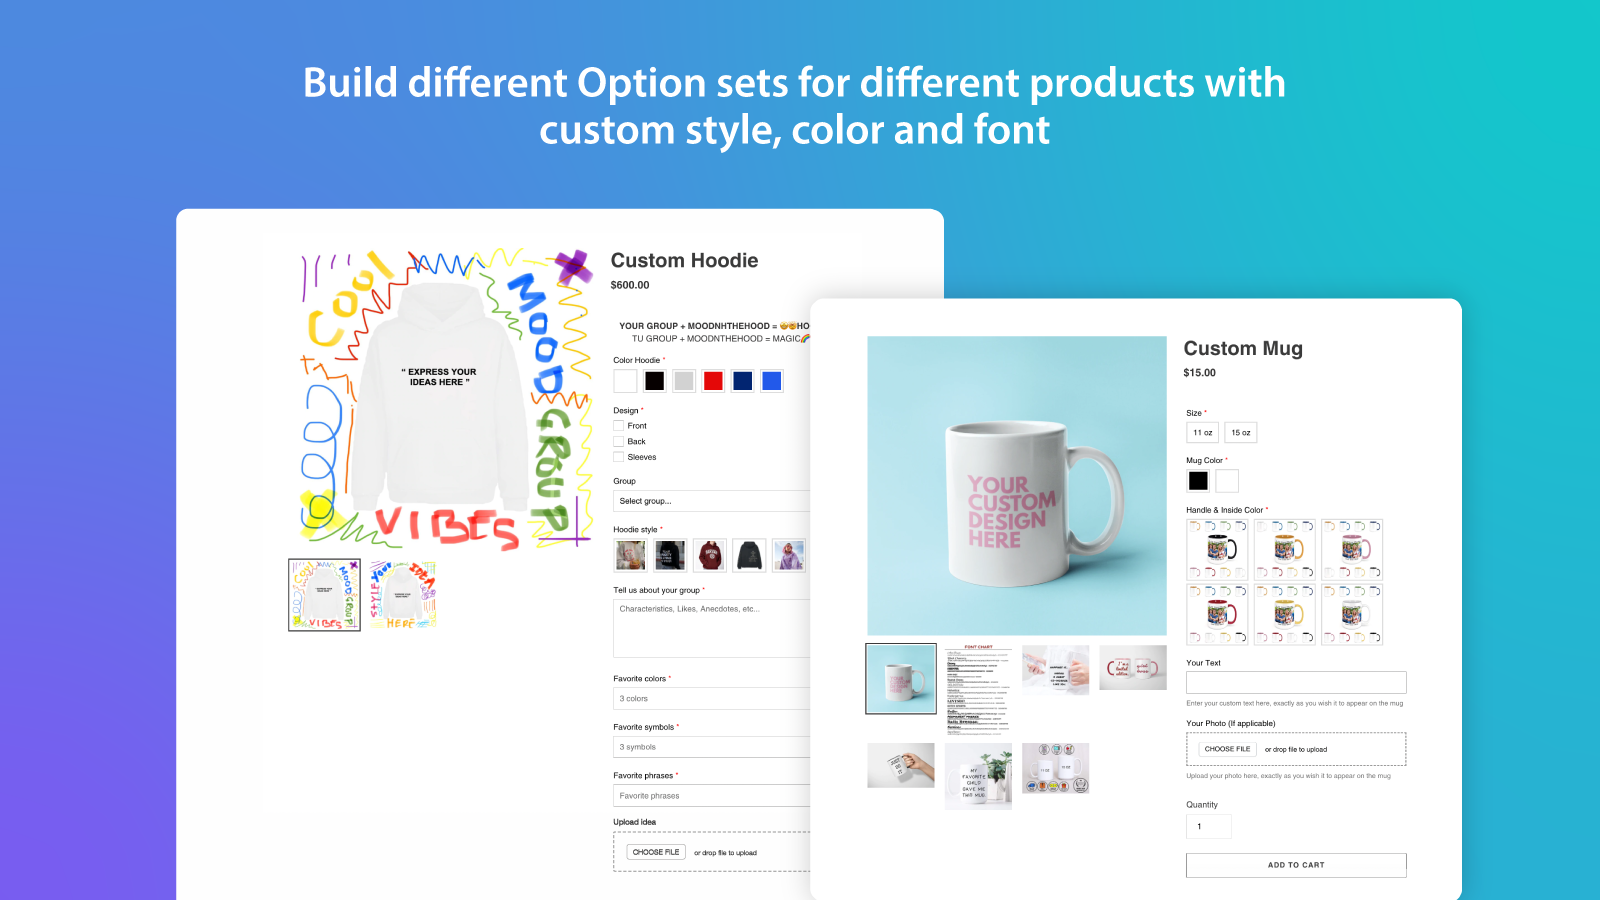  Build different Option sets for different products